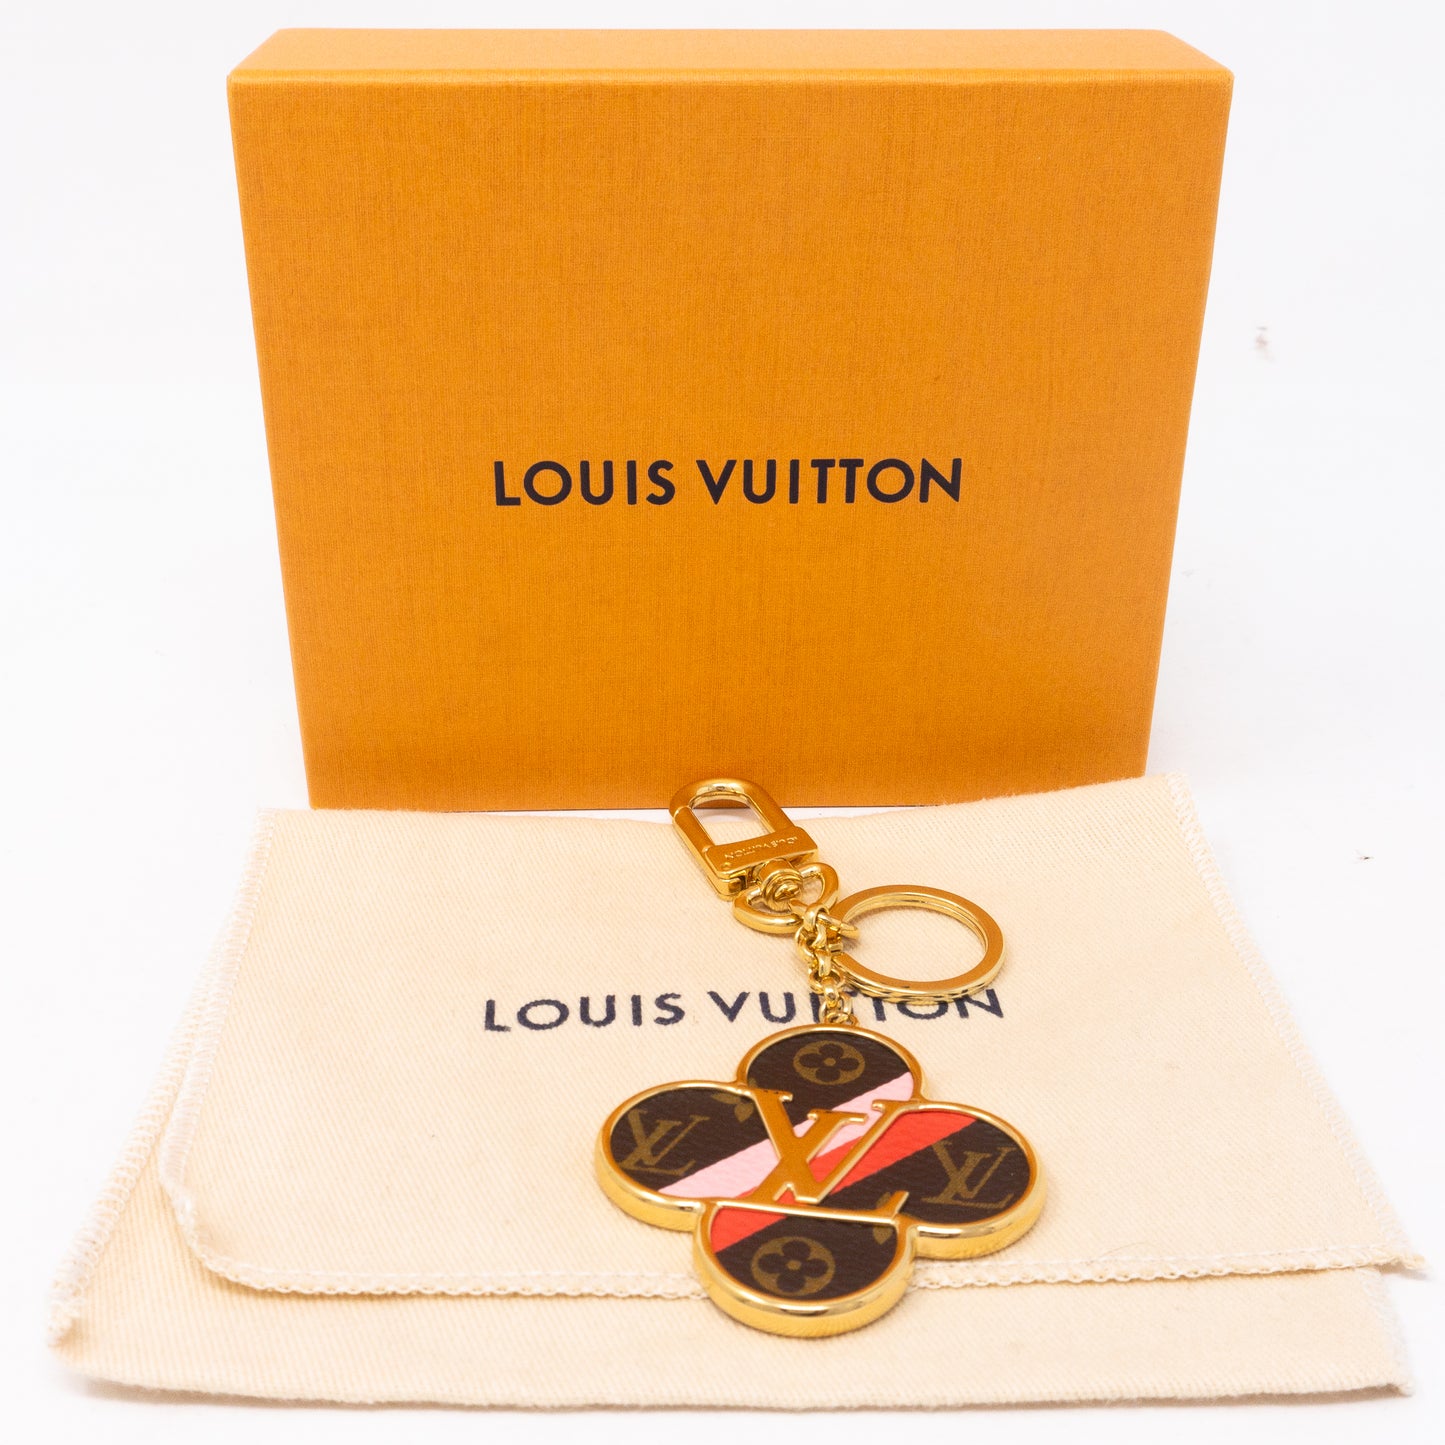 Louis Vuitton Monogram Into The Flower Key Holder and Bag Charm - Brown Bag  Accessories, Accessories - LOU795632